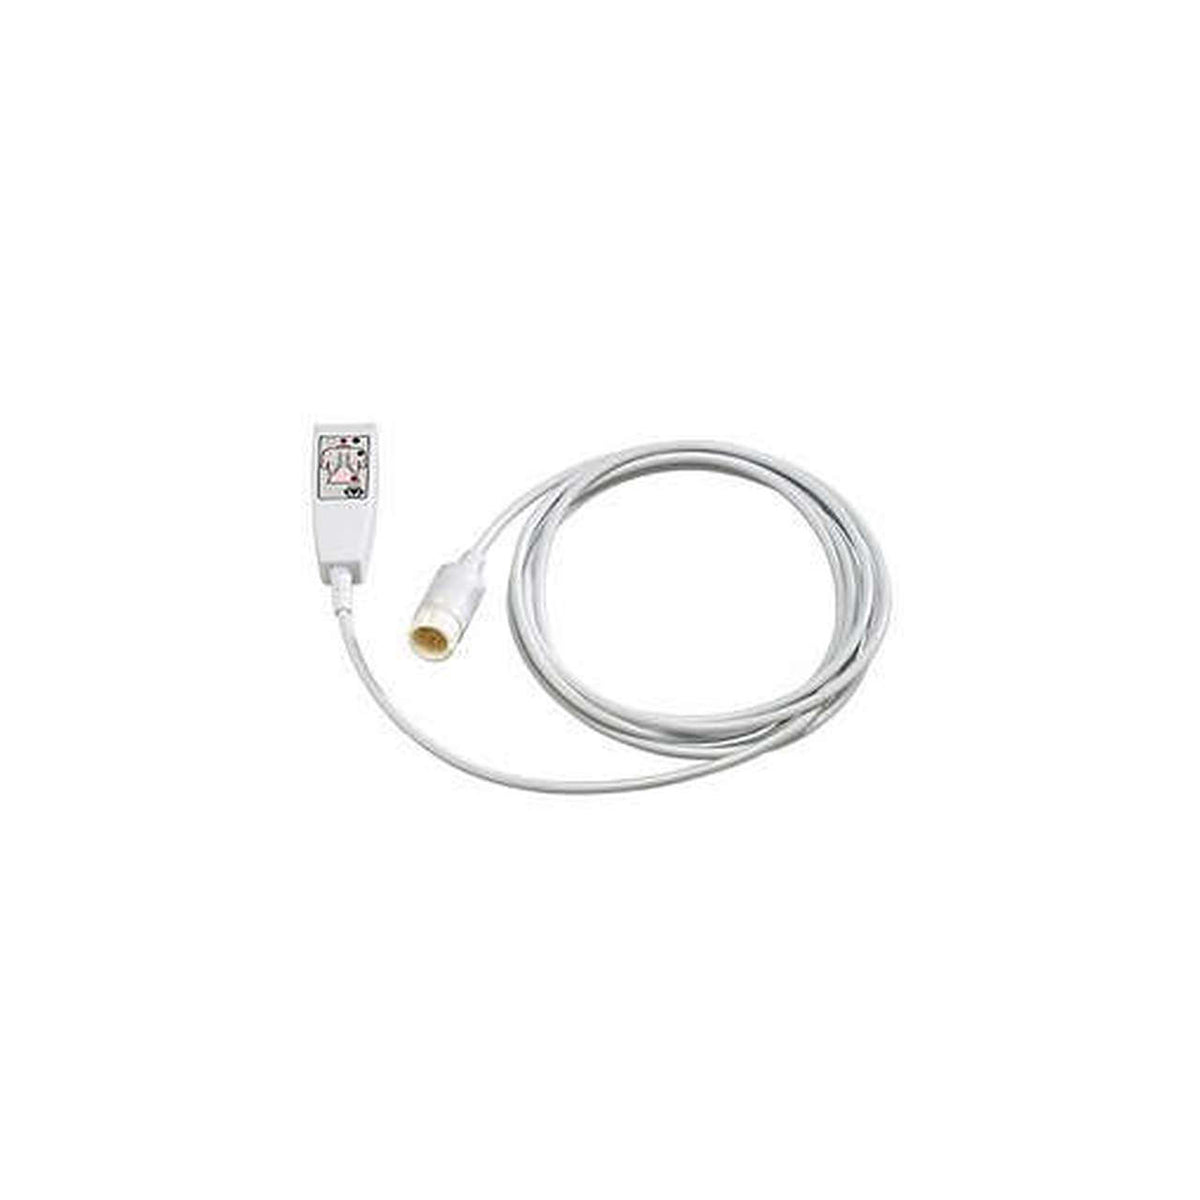 ECG Trunk Cable 3 Lead compatible with Philips / GE / L&T/ Datex Ohmed